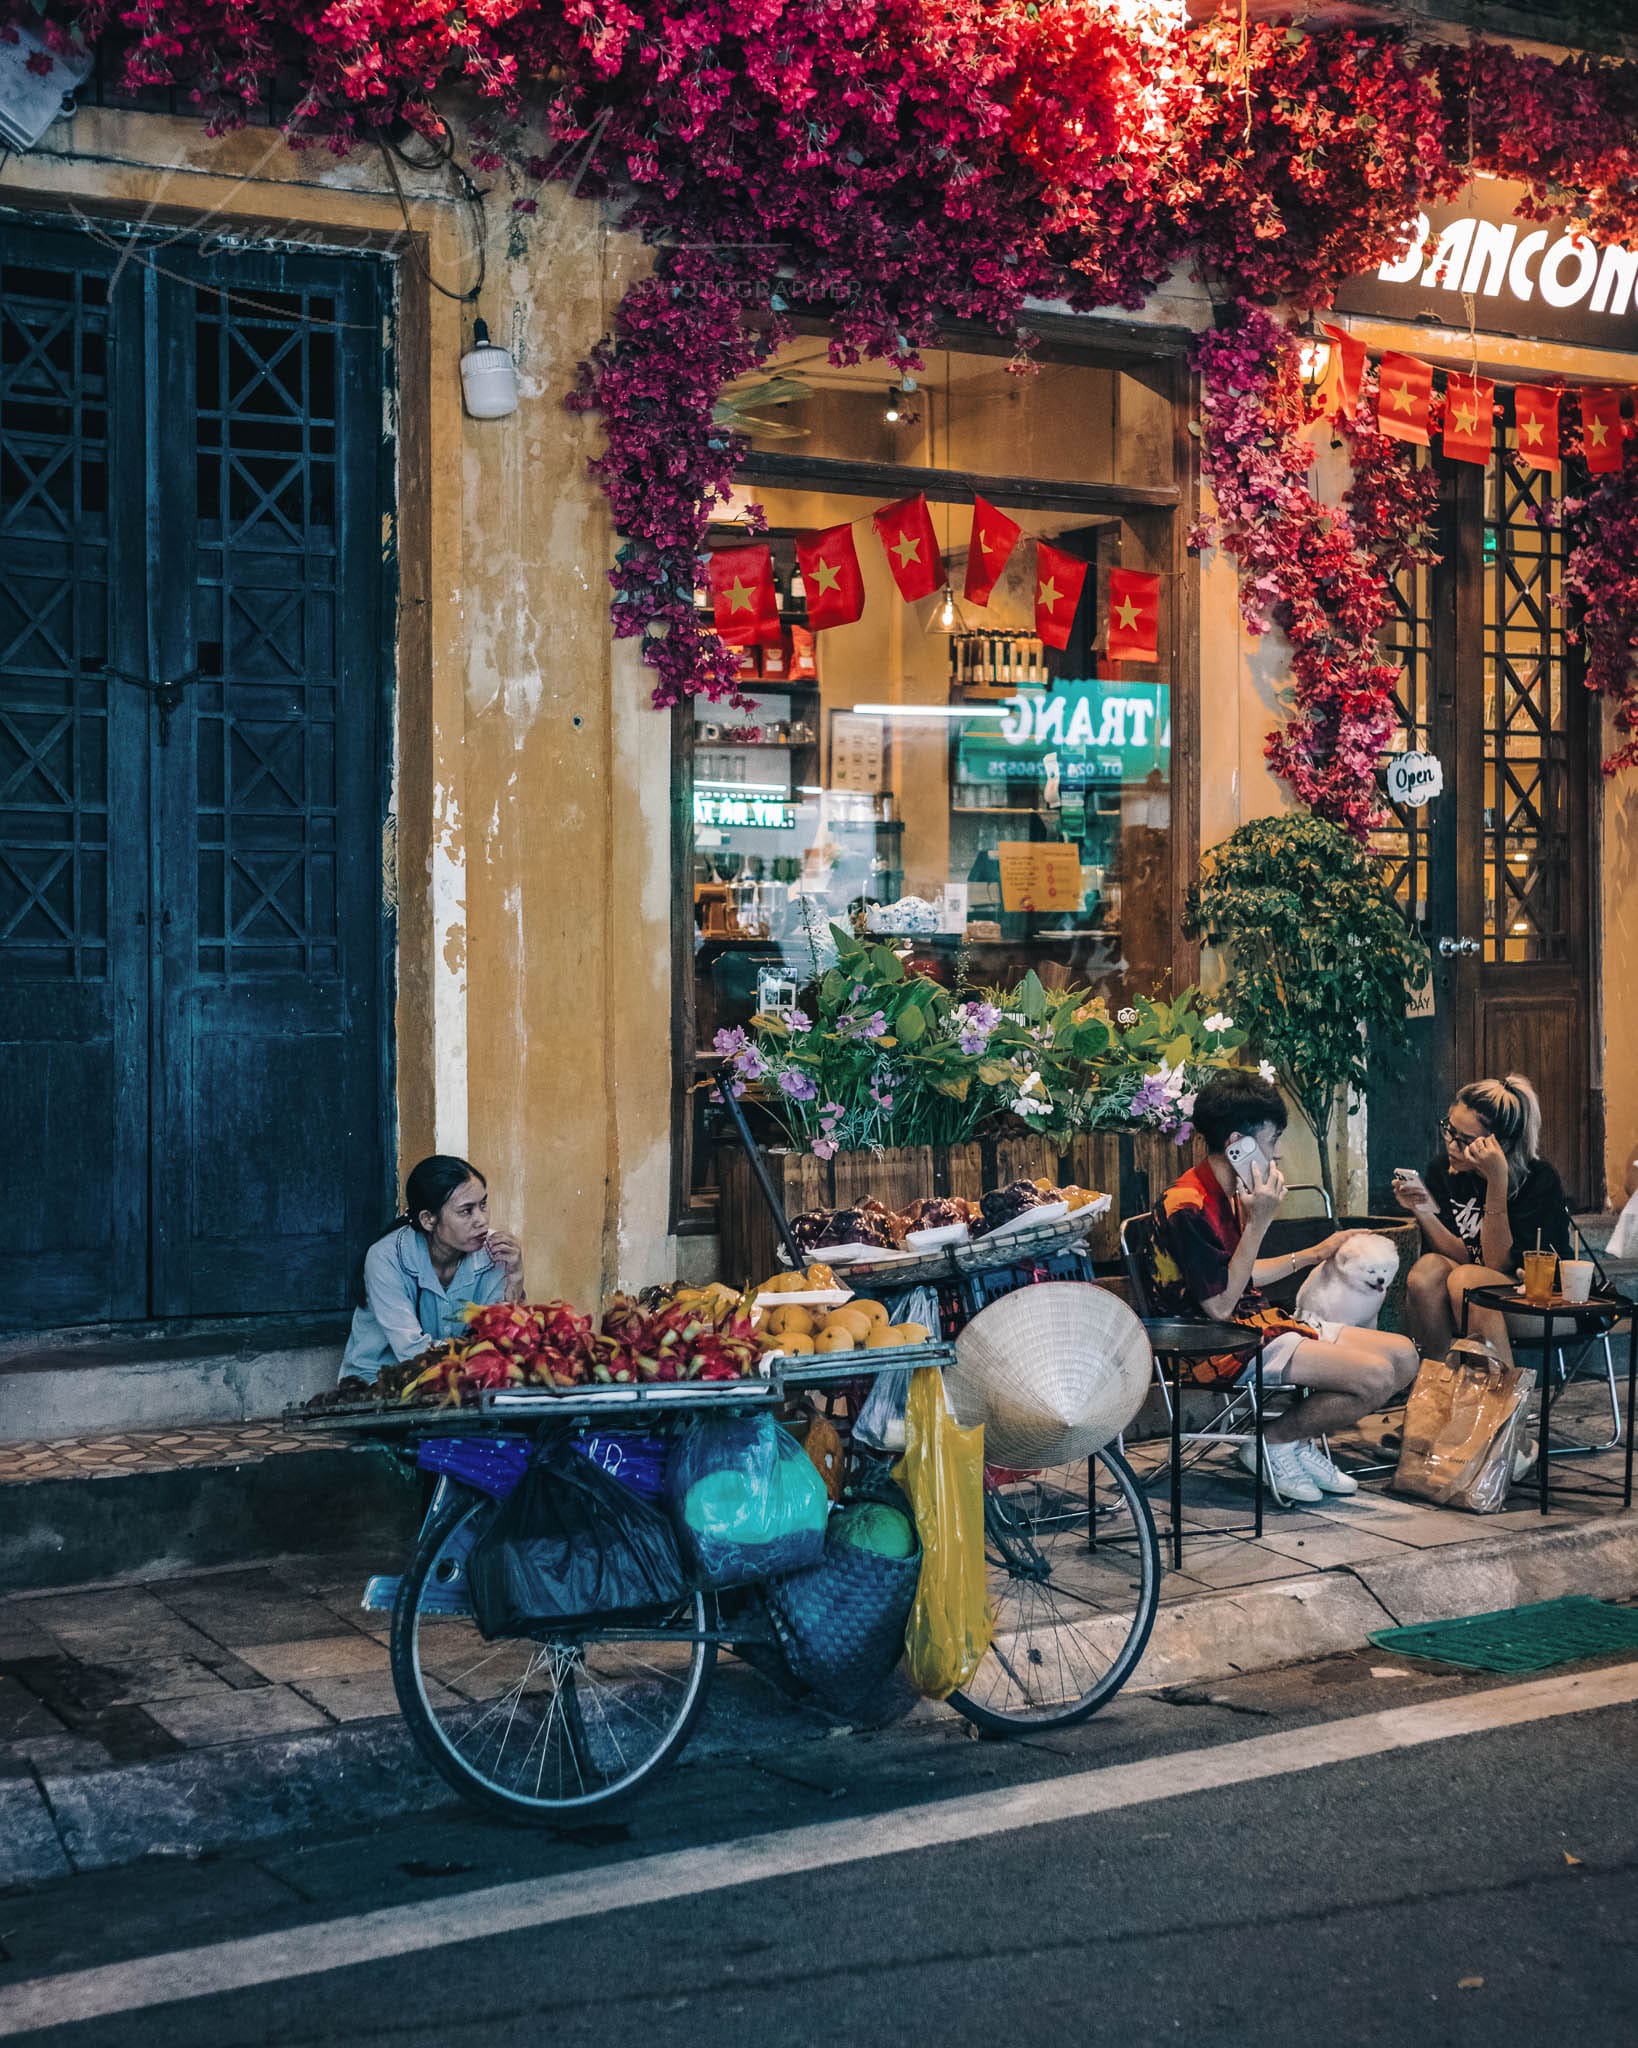 Traditional fruit cart in a lively Hanoi street market during evening.